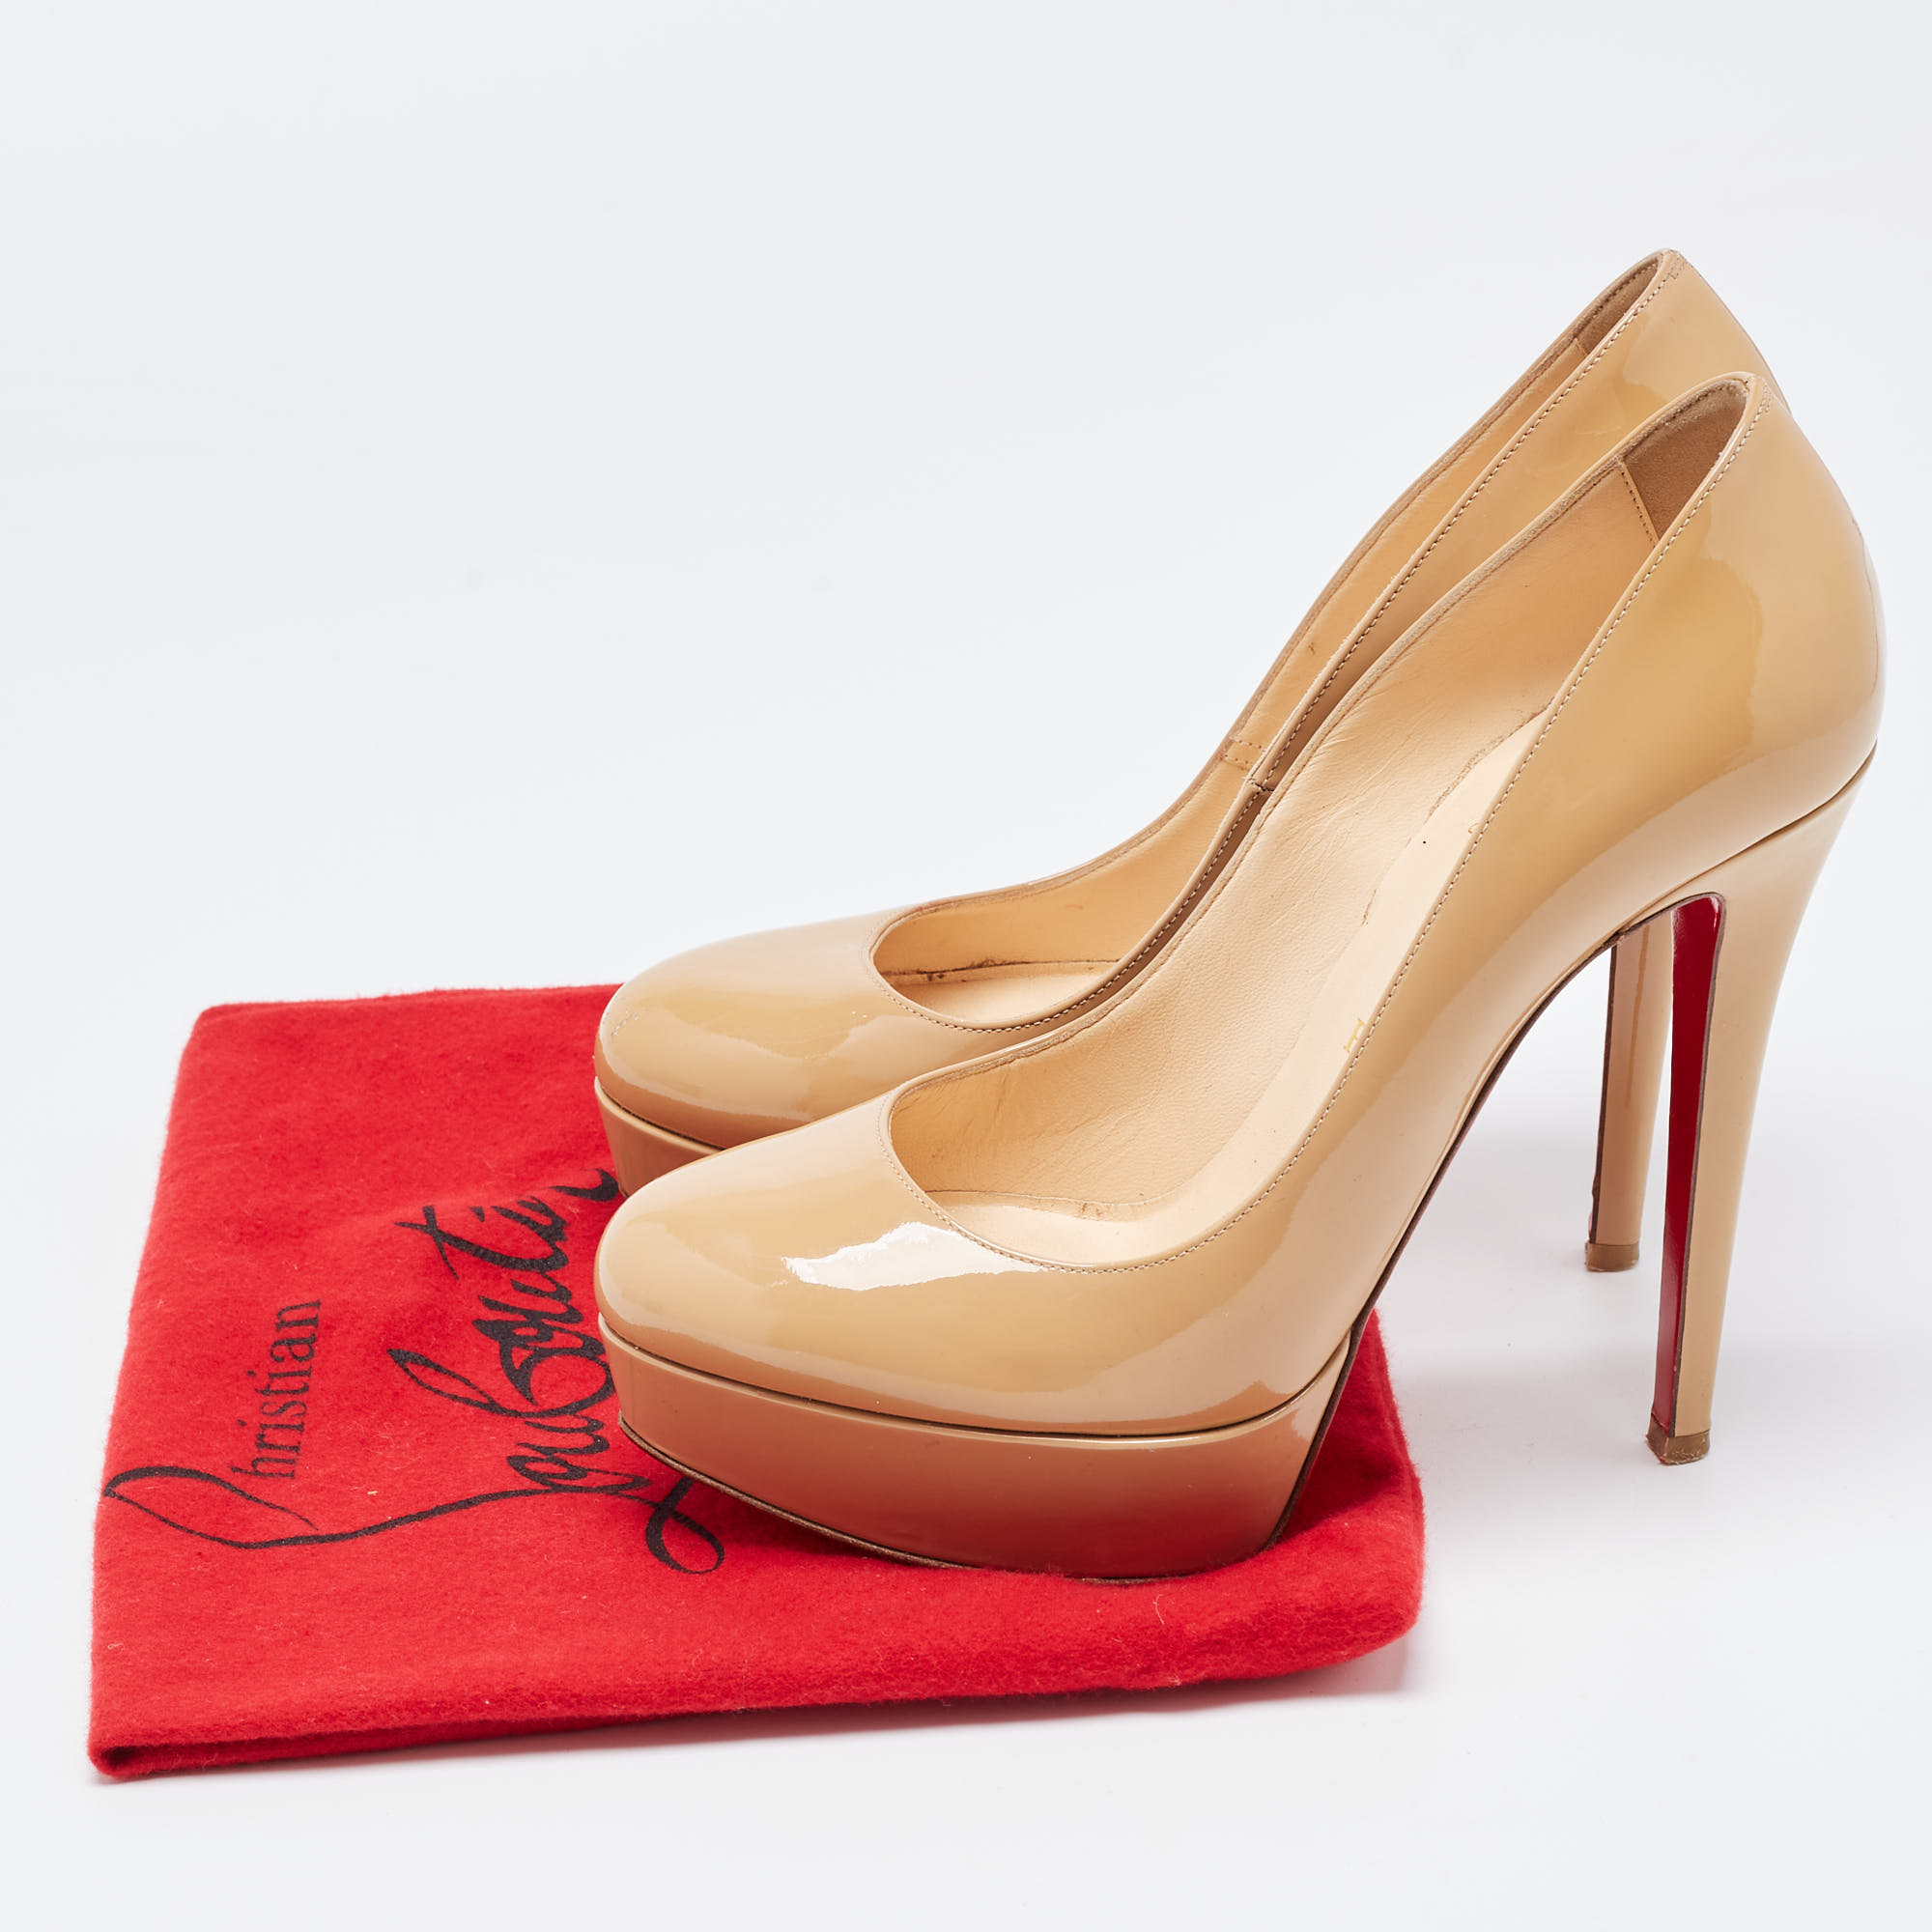 Christian Louboutin Beige Patent Leather Bianca Pumps Size 37.5